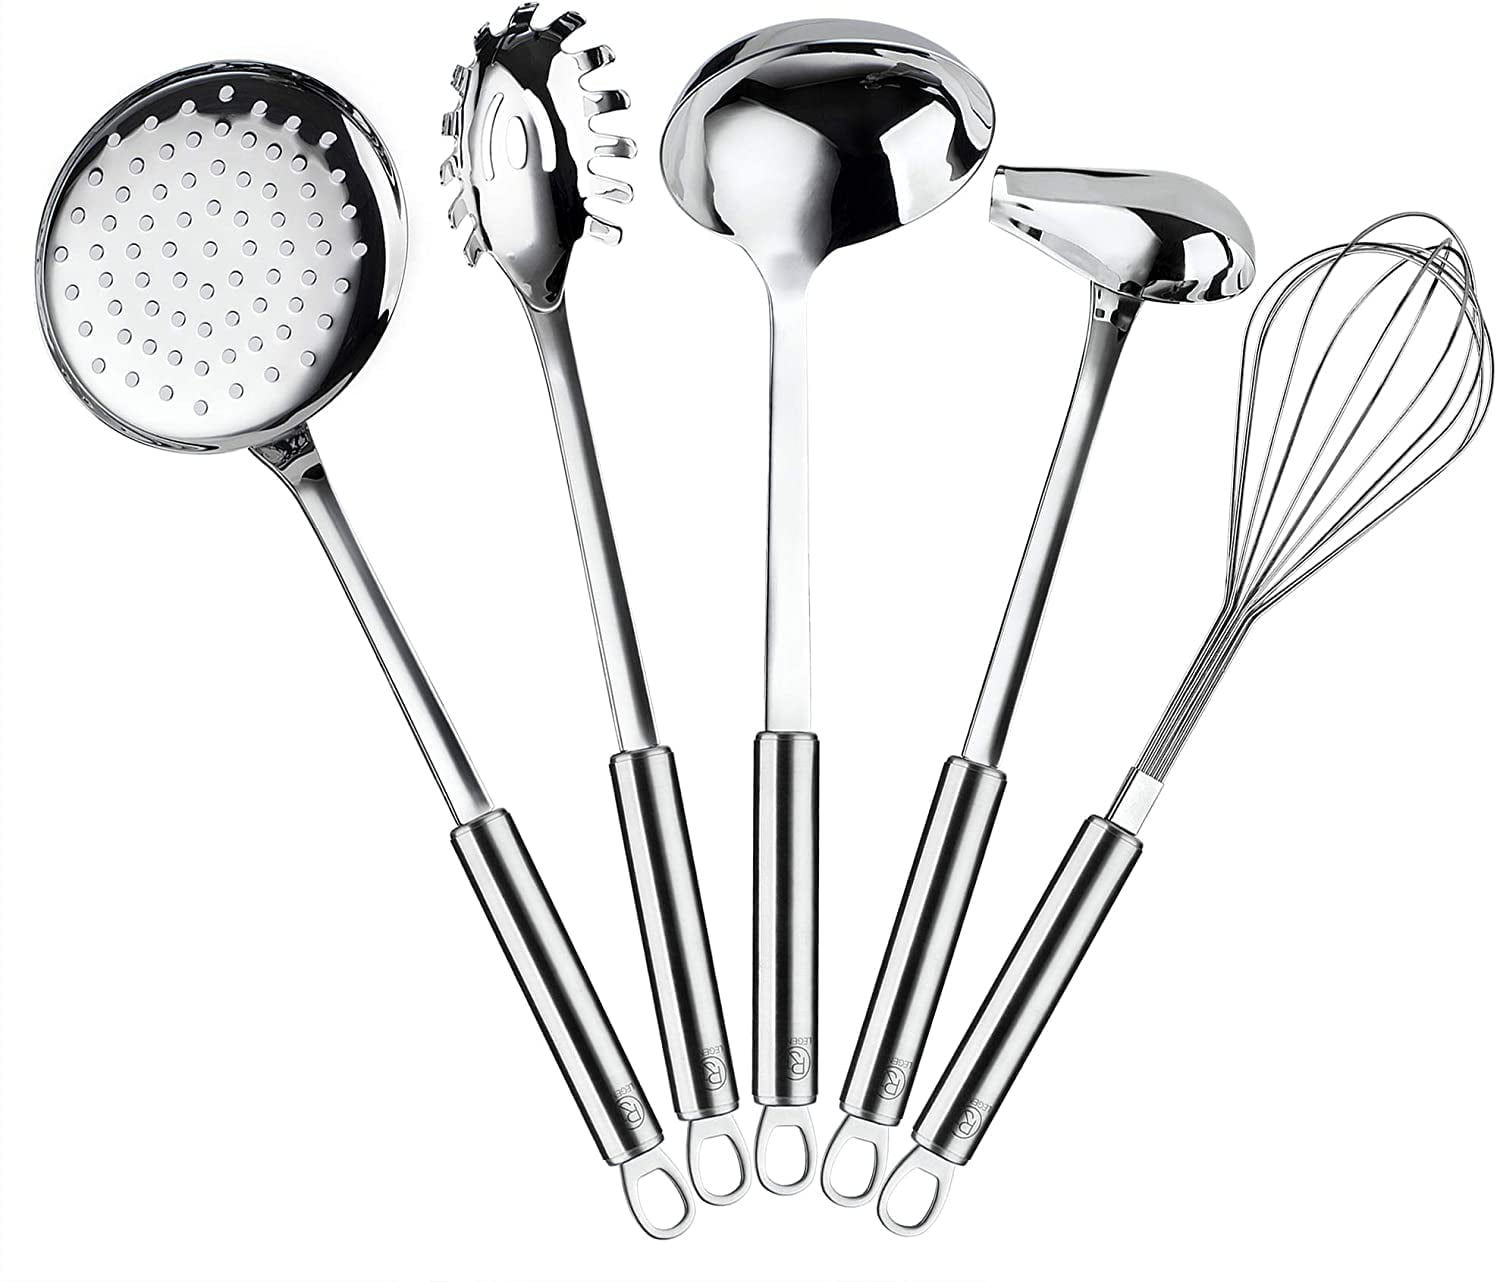 Choice 2-Piece Hollow Stainless Steel Handle Cake Serving Utensils Set